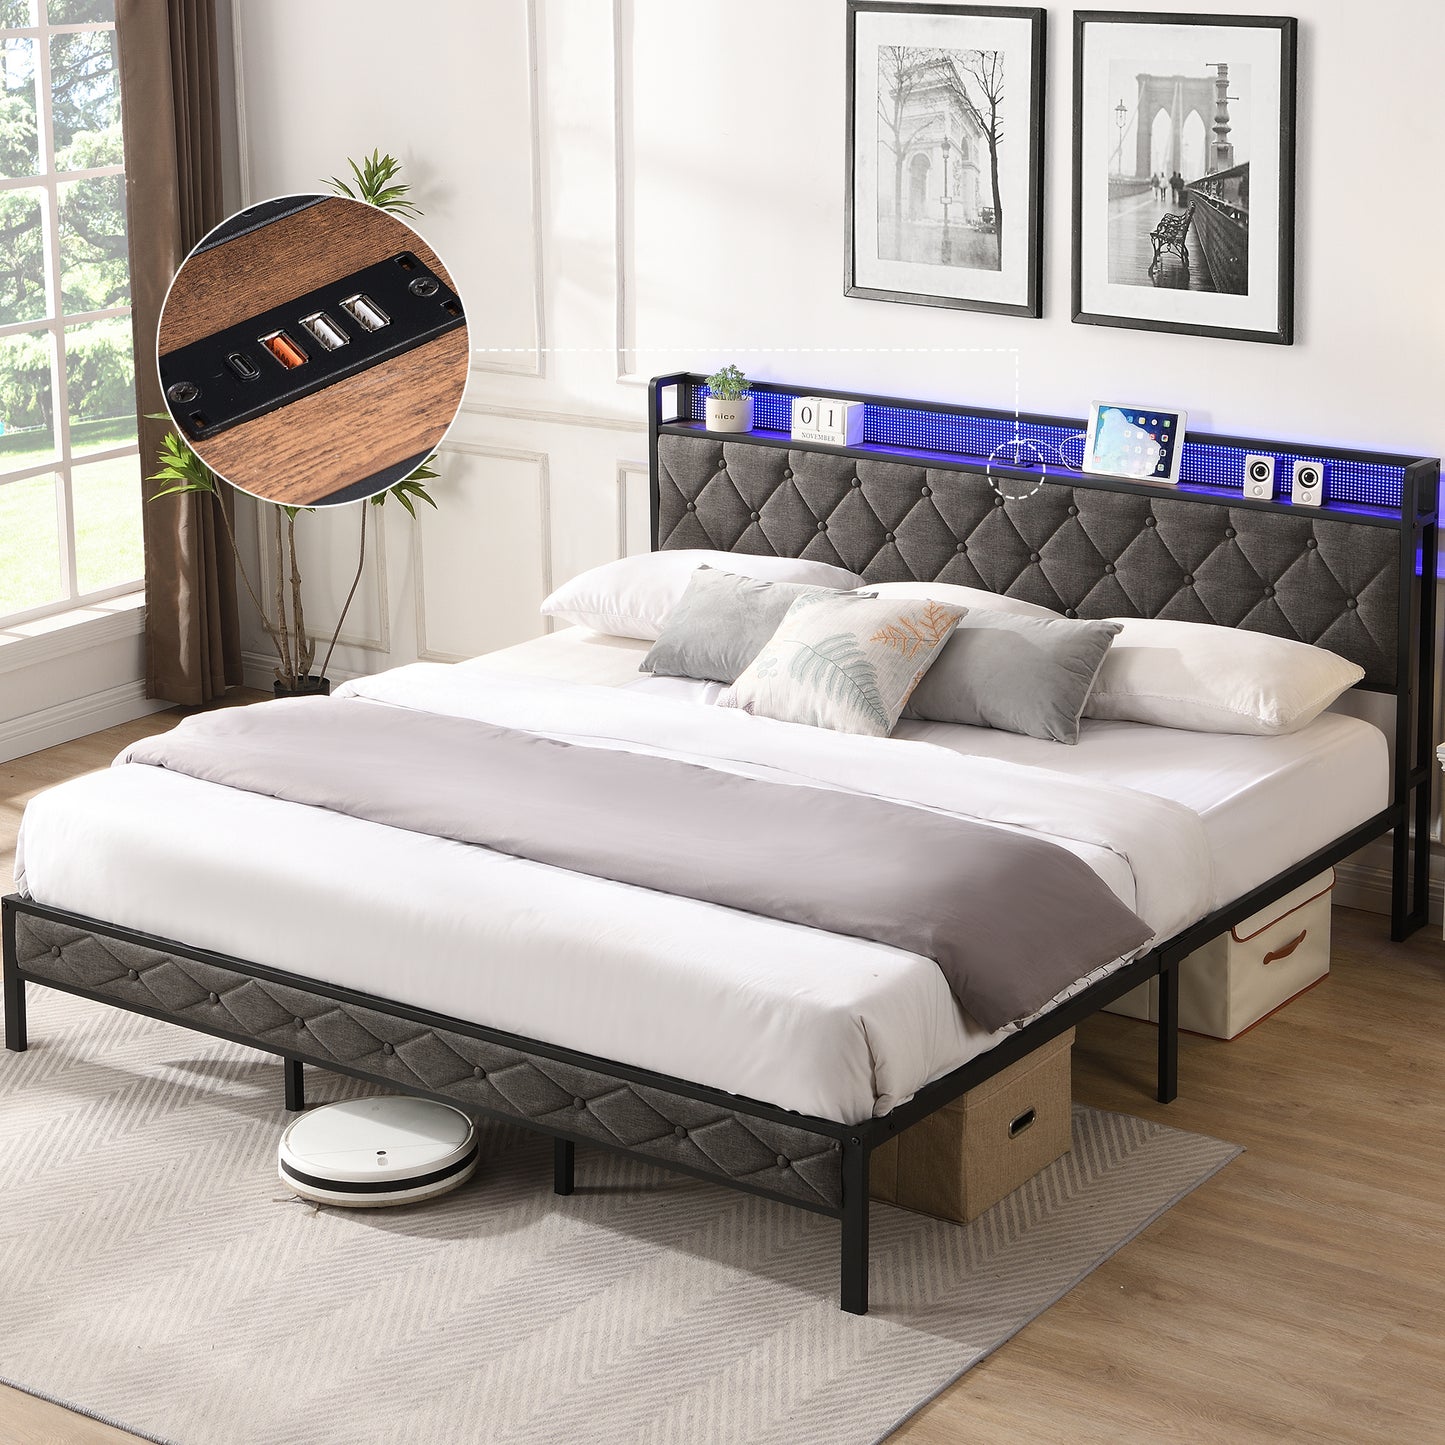 King Bed with Storage Headboard